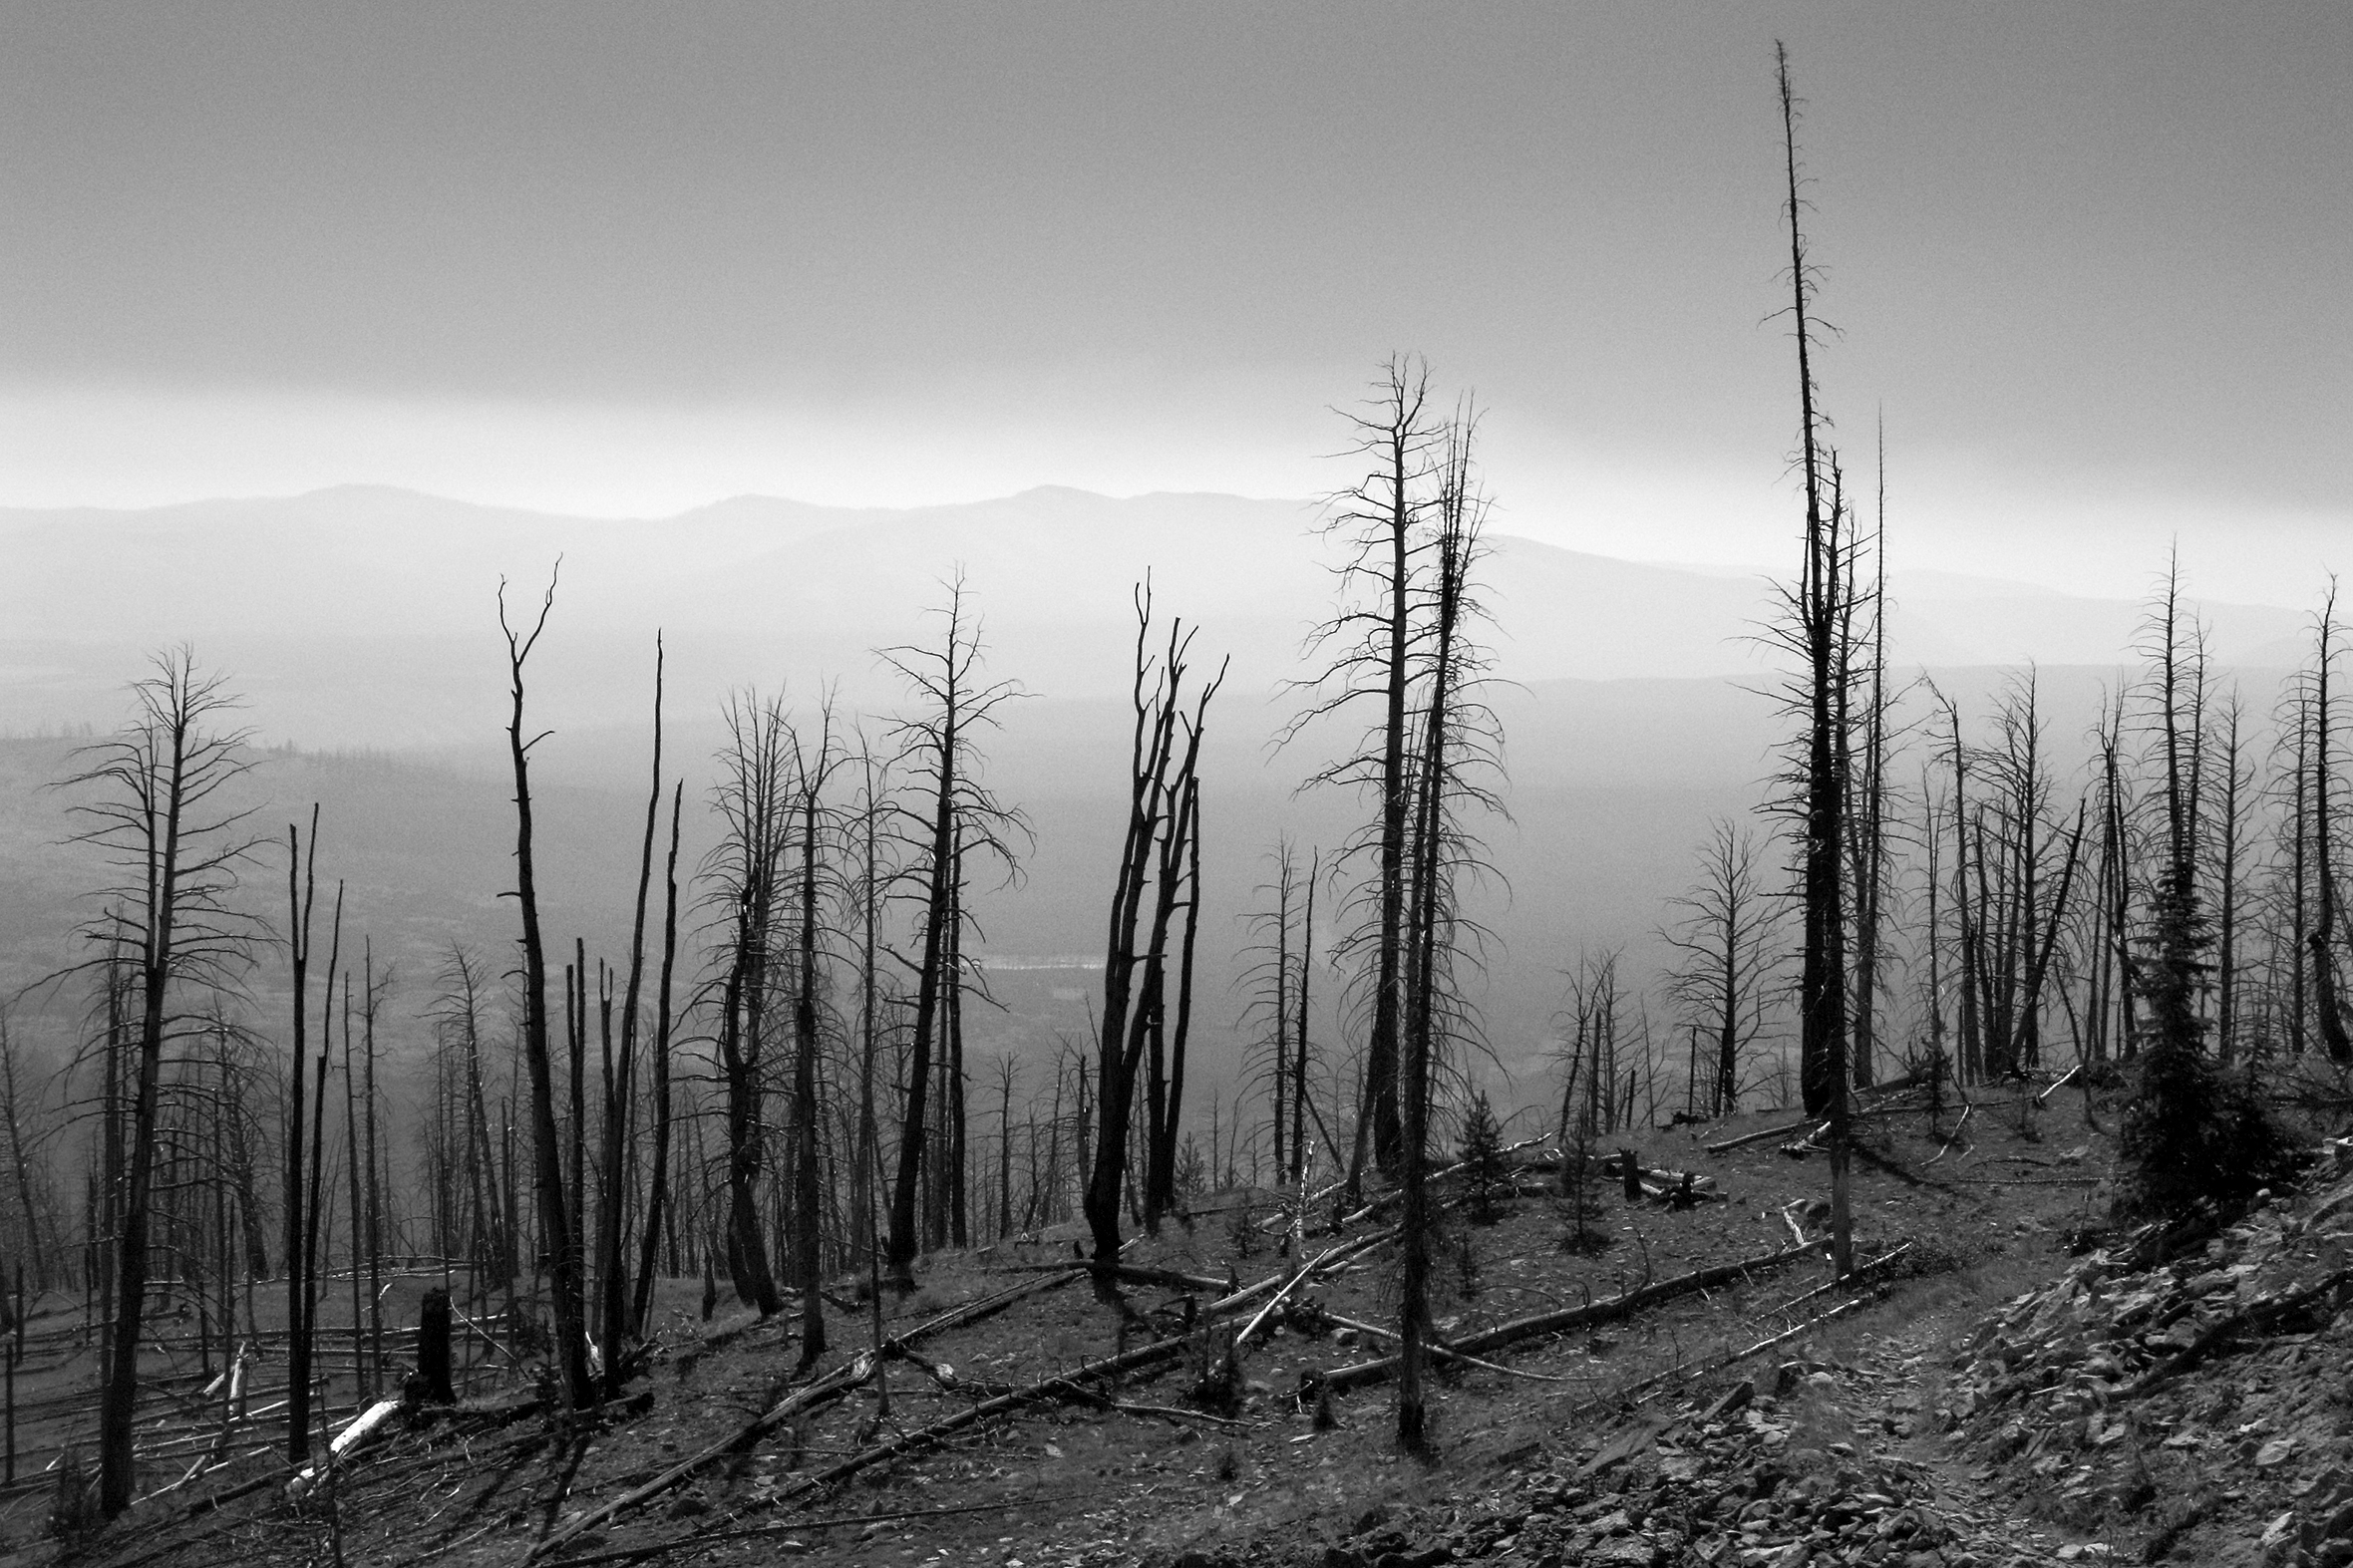 A forest of burned trees.